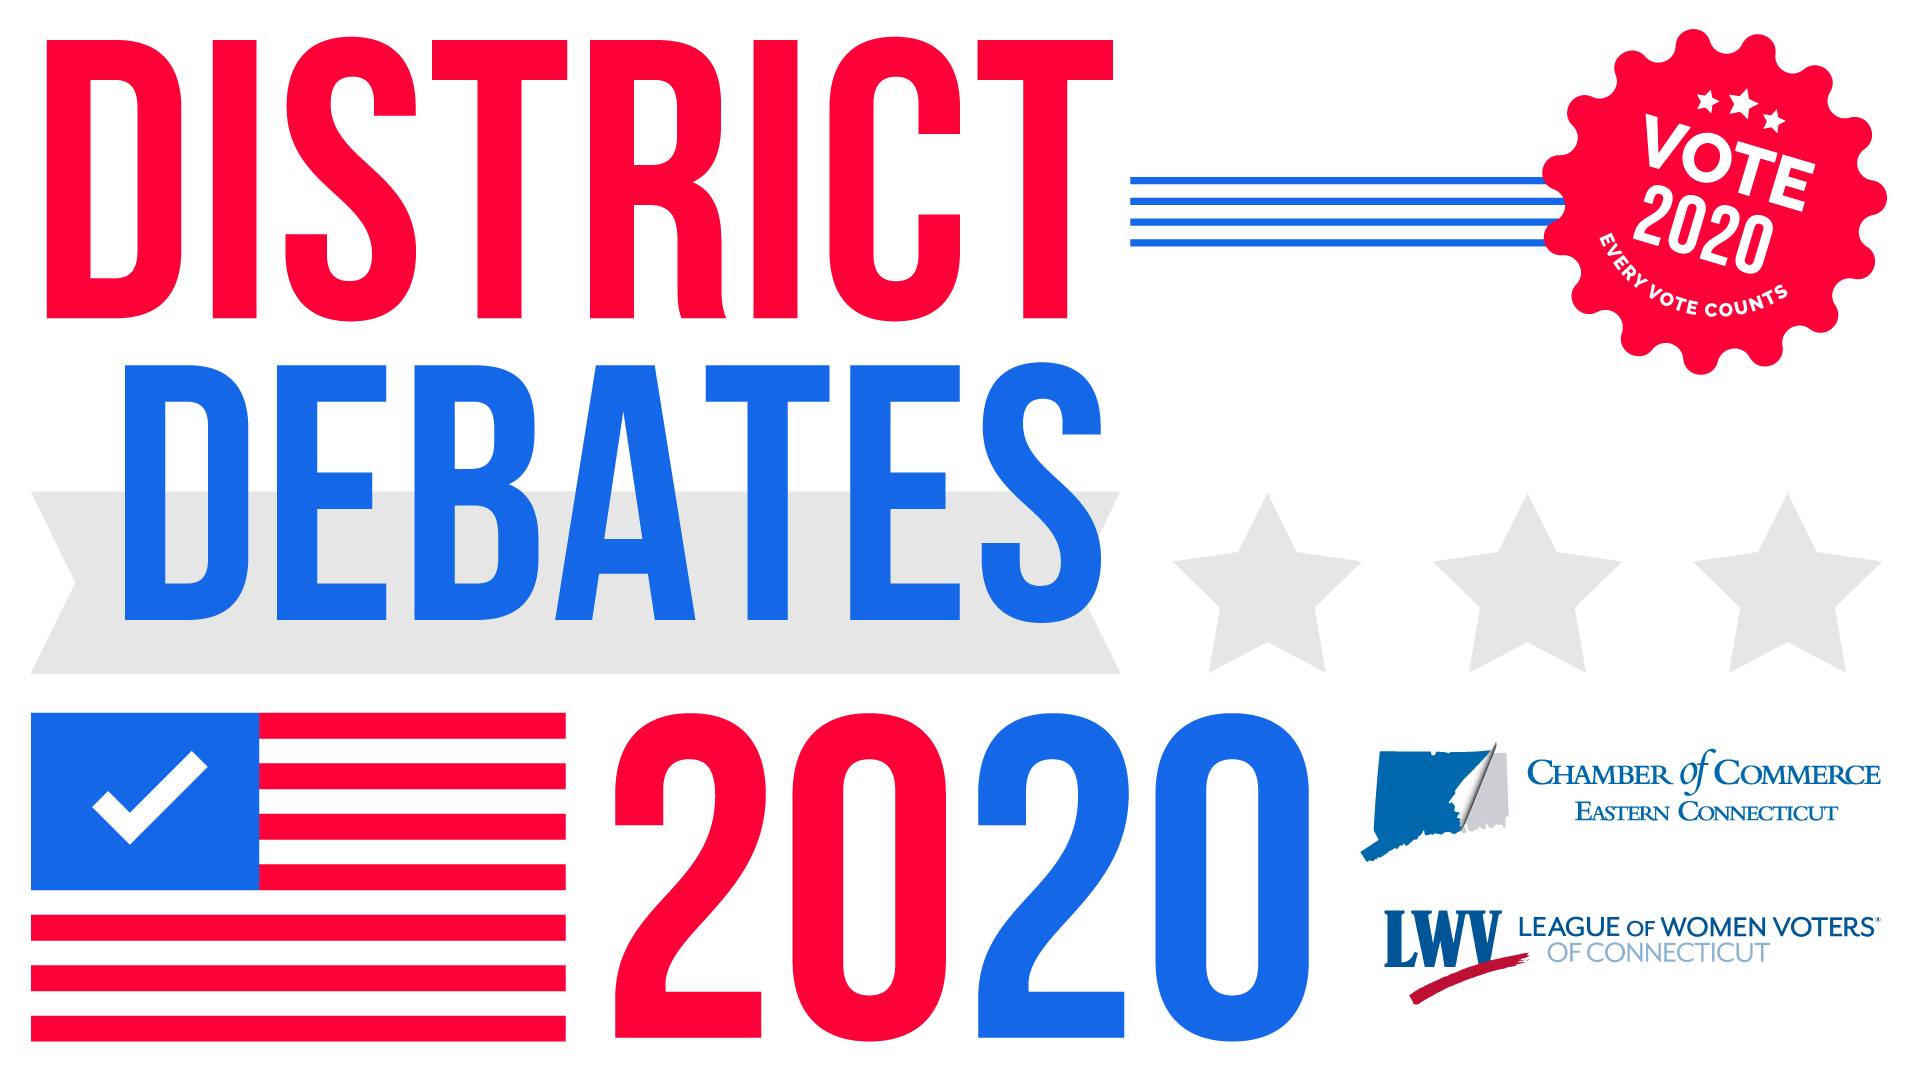 LWV Southeastern CT Candidate Debate House District 42 flyer